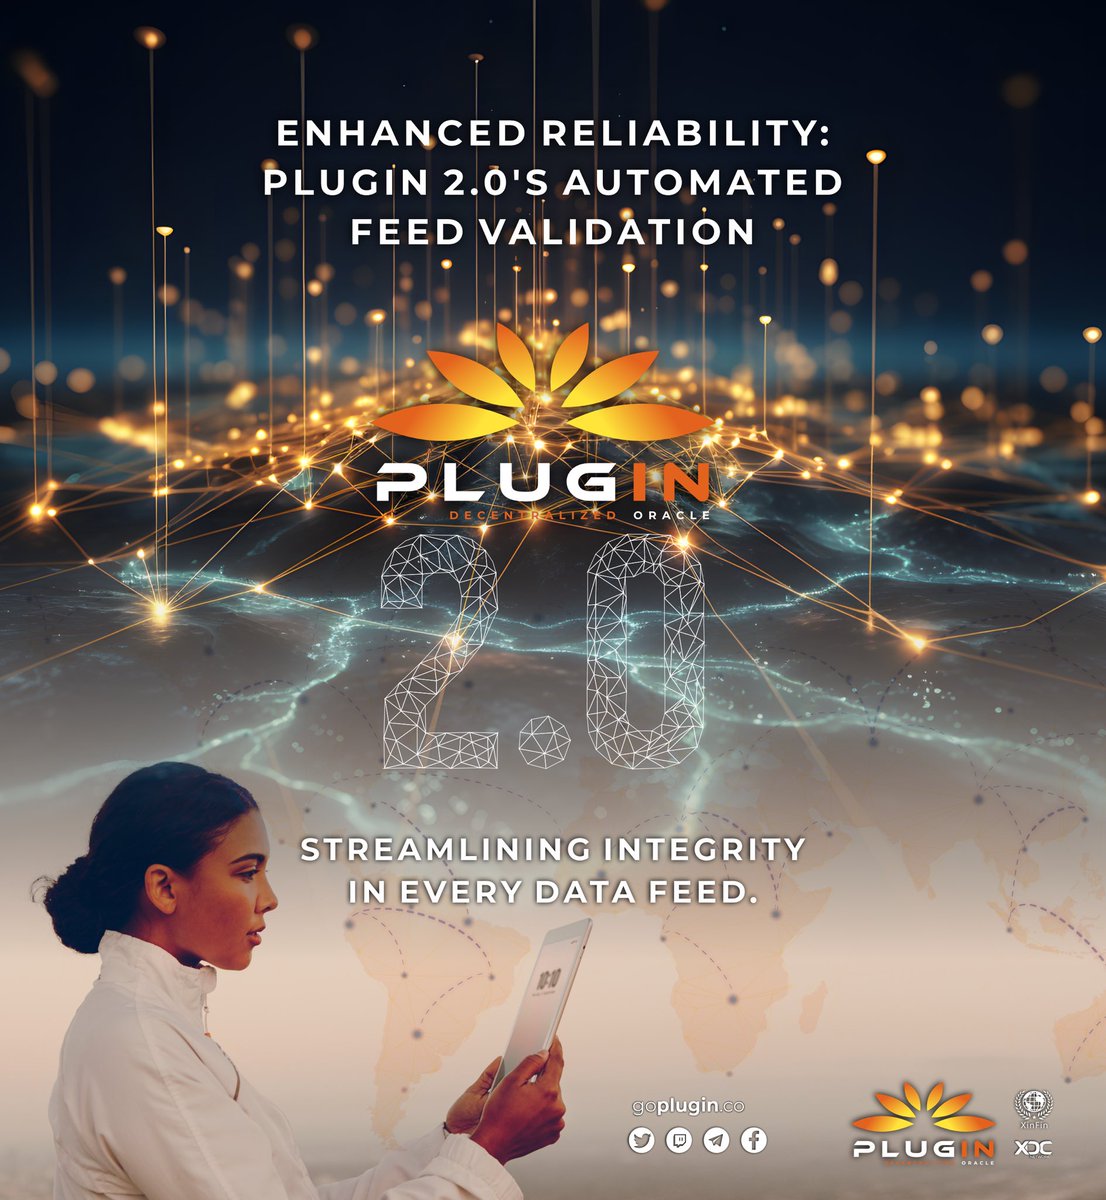 We are glad to announce that as part of #Plugin 2.0 Enhancements, we have implemented Automated Feed Validation to ensure the smooth operation of data feed jobs within its ecosystem. Swift detection and reporting of any issues uphold #DataIntegrity for both Plugin 2.0 and its…